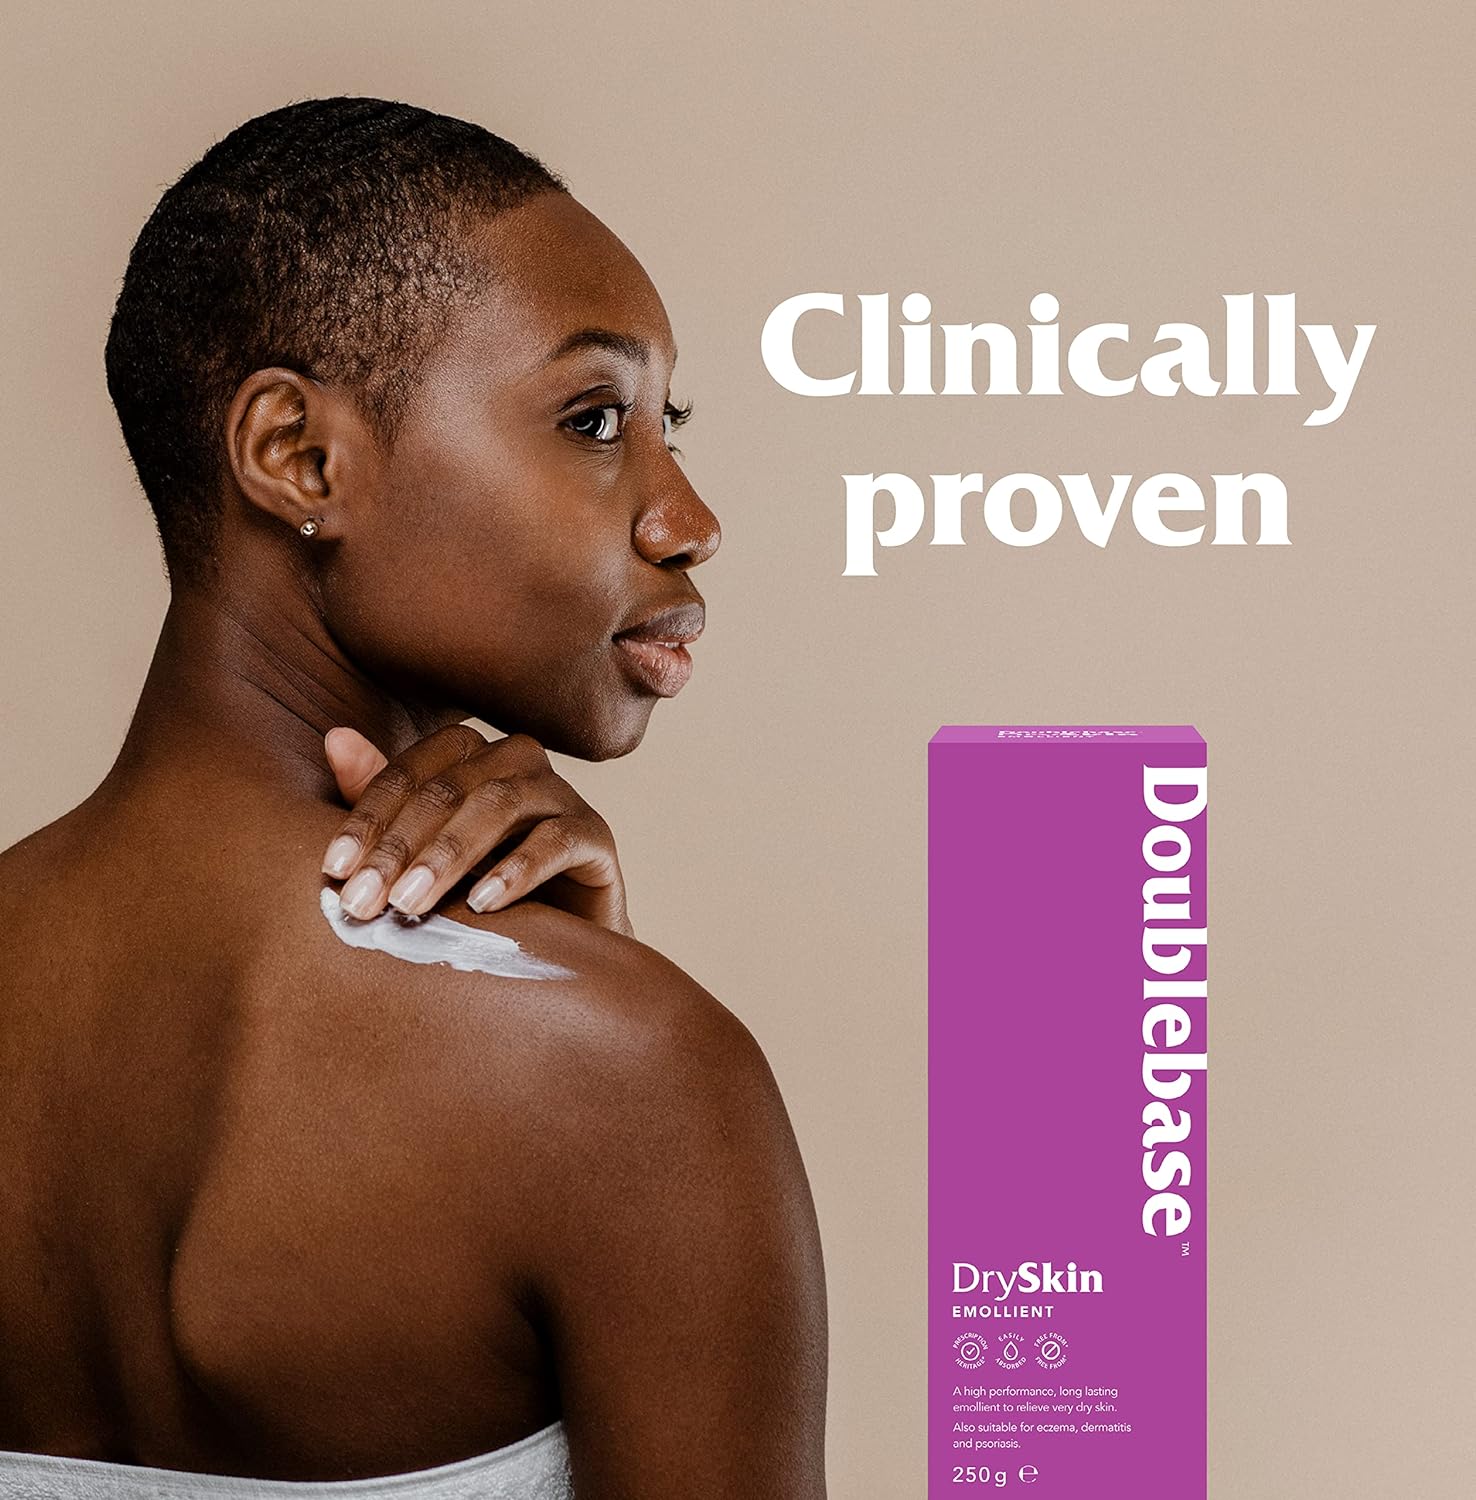 Doublebase Dry Skin Emollient. Clinically Proven Moisturiser for Eczema, Psoriasis and Dermatitis Treatment. Body Cream for Dry Skin Relief, 250g Pump Pack : Amazon.co.uk: Health & Personal Care